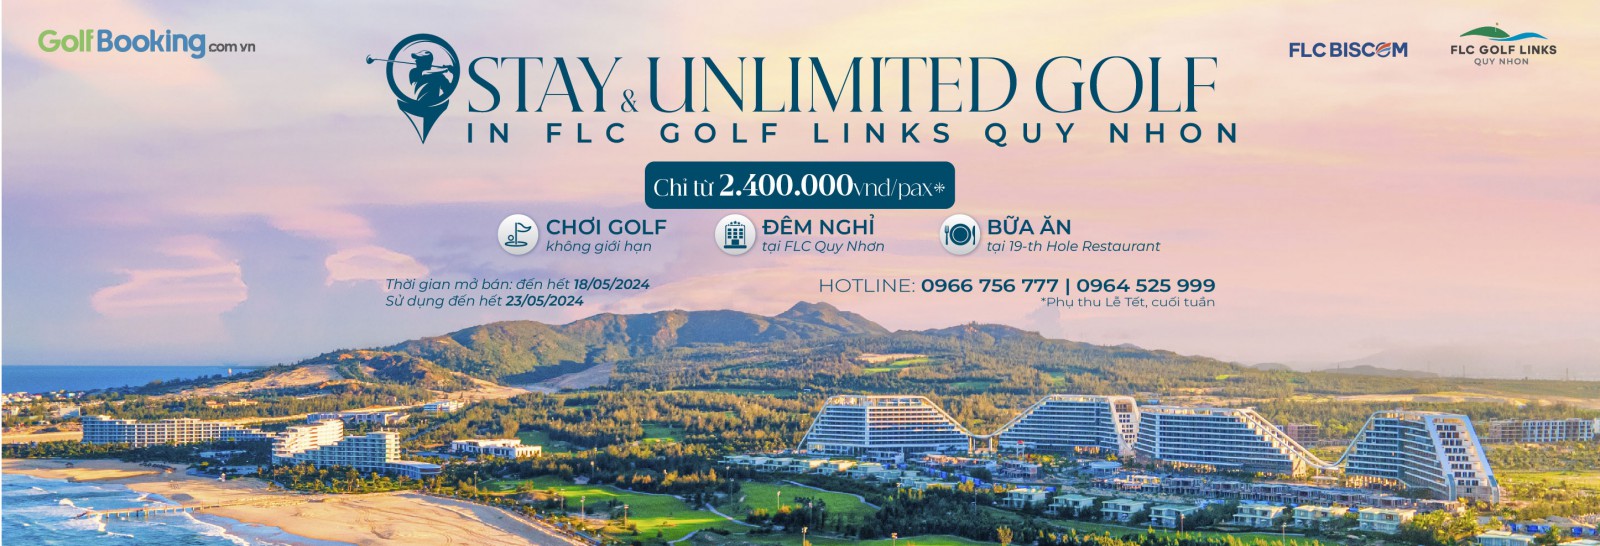 STAY & UNLIMITED GOLF IN FLC GOLF LINKS QUY NHON